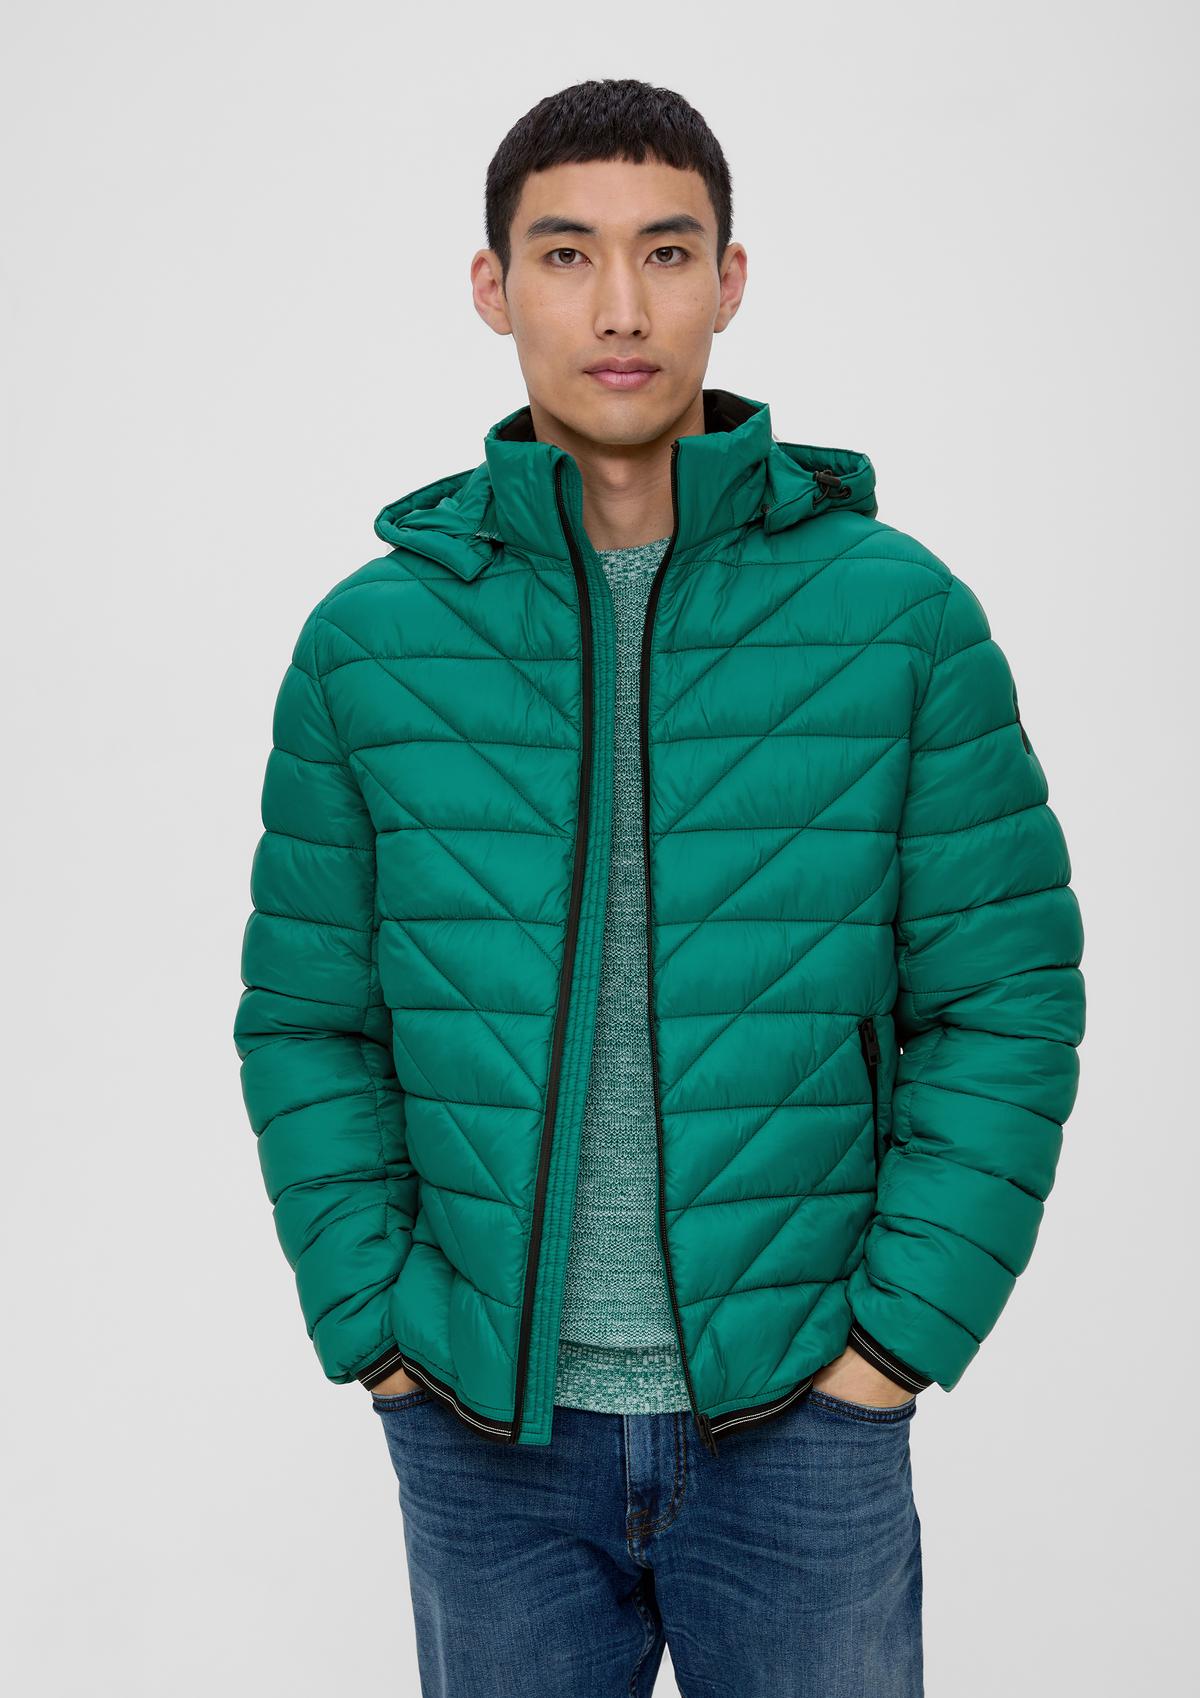 Quilted jacket with contrasting details